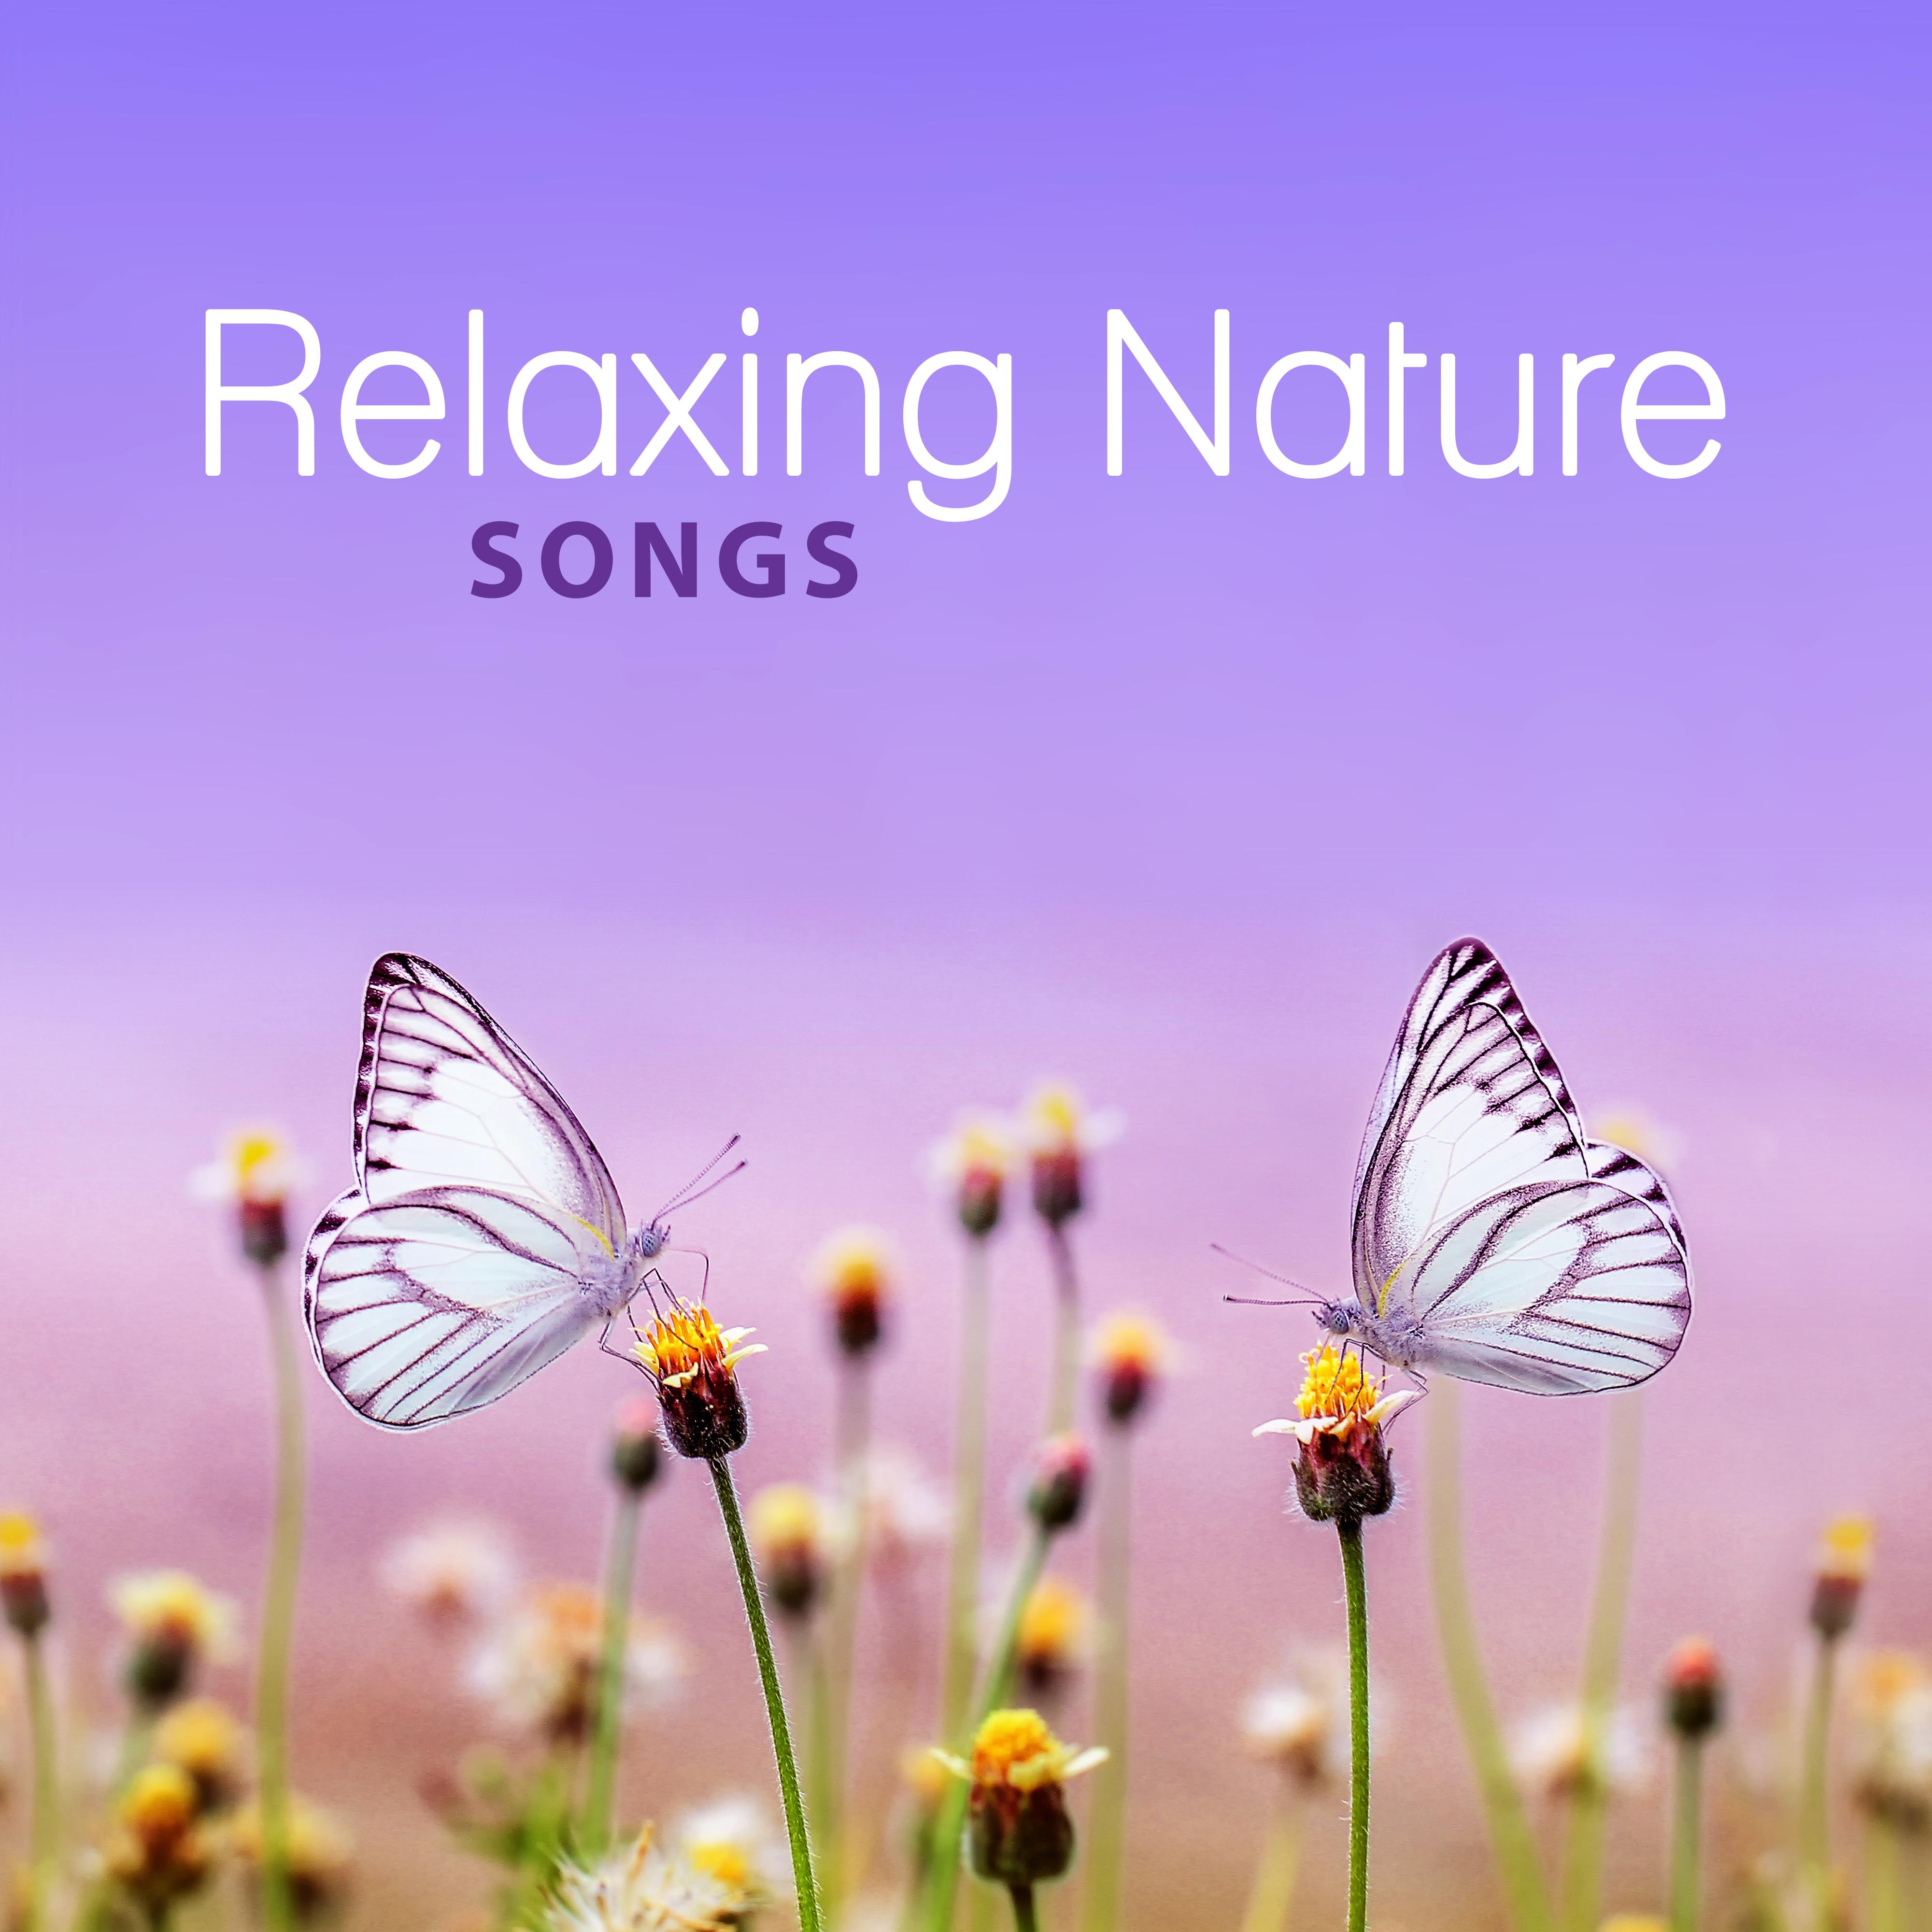 Relaxing Nature Songs  Soothing New Age Music for Relaxation, Relaxing Music, Relieve Stress, Calm Down